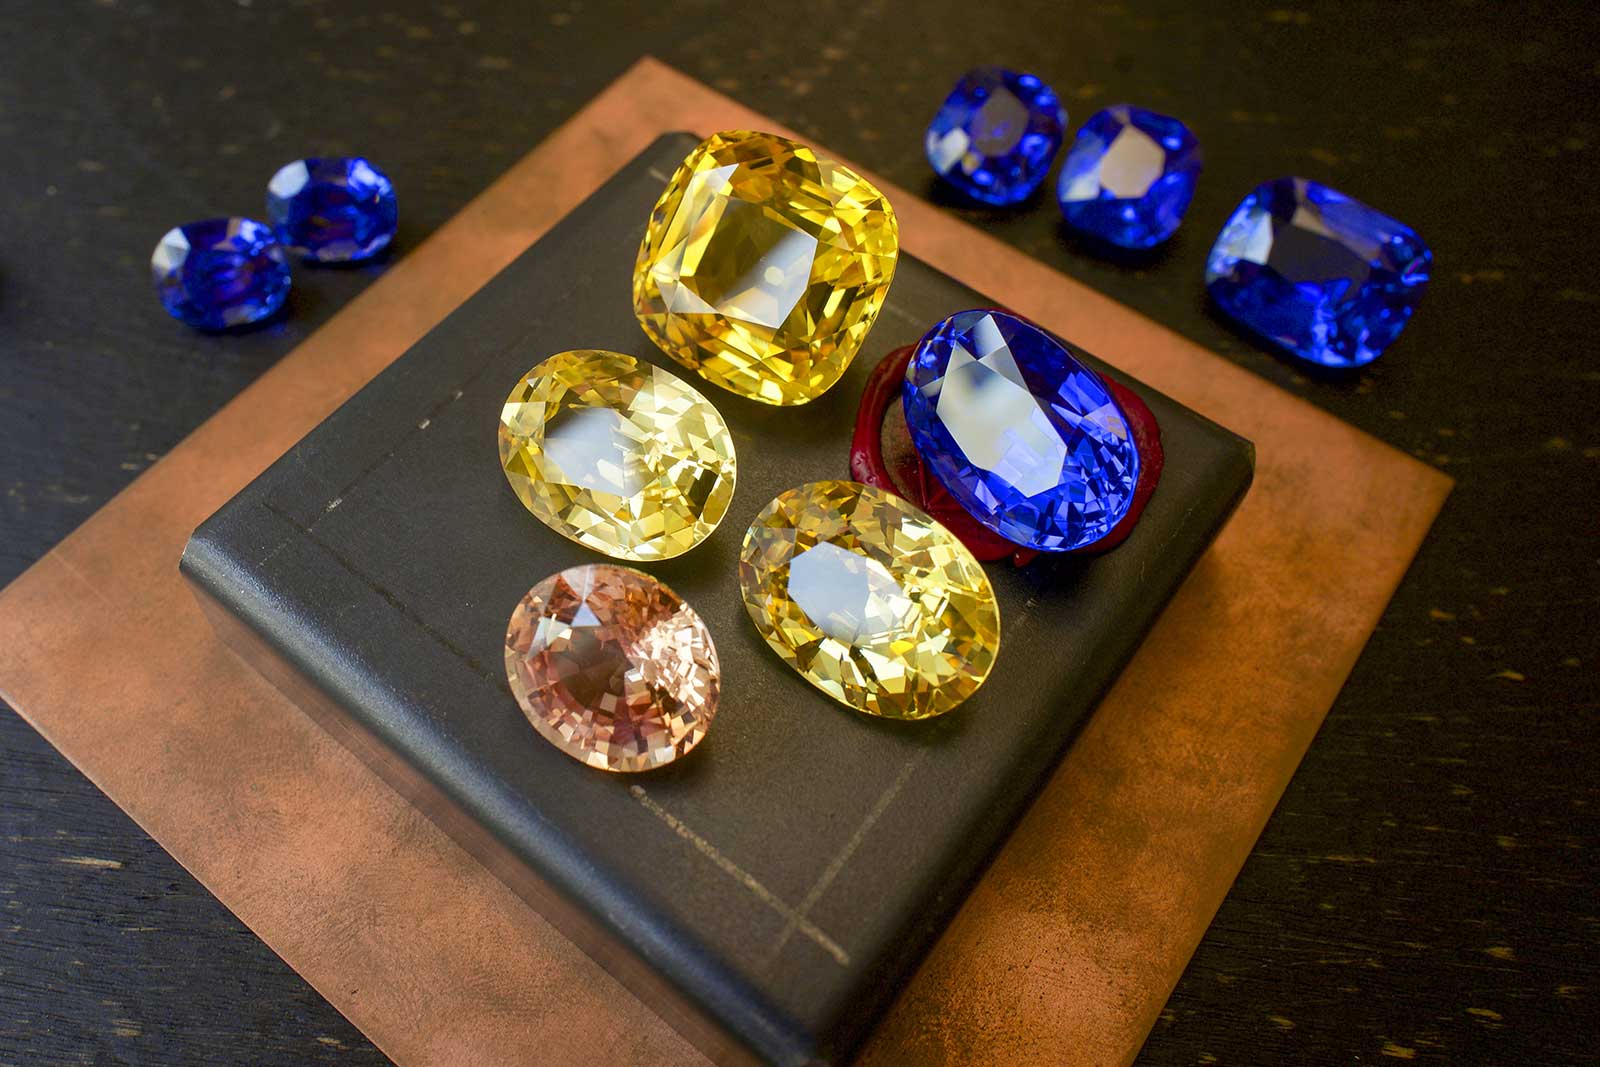 A selection from Vladyslav Y. Yavorskyy's Ceylon sapphire collection